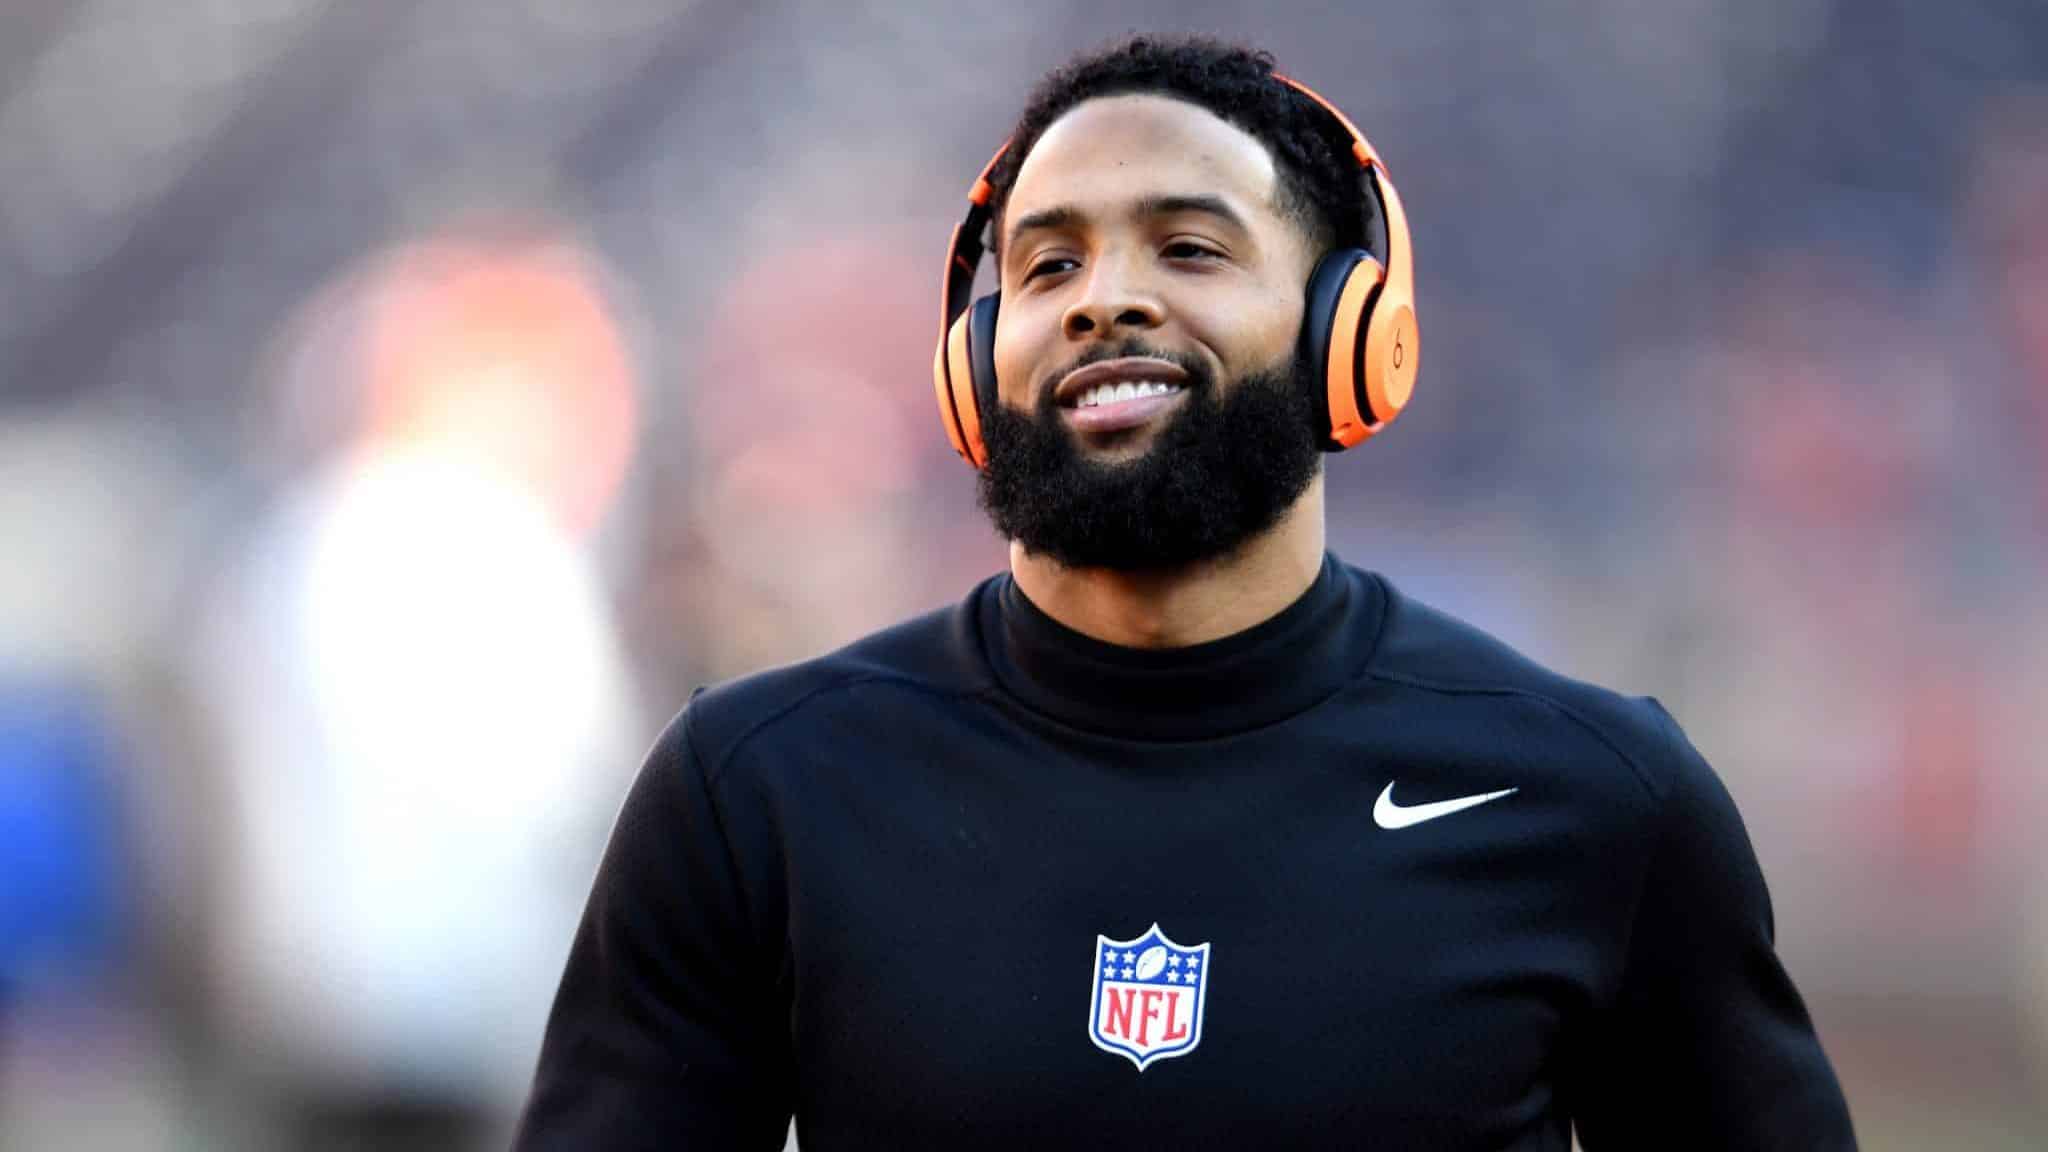 CLEVELAND, OHIO - DECEMBER 22: Odell Beckham Jr. #13 of the Cleveland Browns warms up prior to the game against the Baltimore Ravens at FirstEnergy Stadium on December 22, 2019 in Cleveland, Ohio.